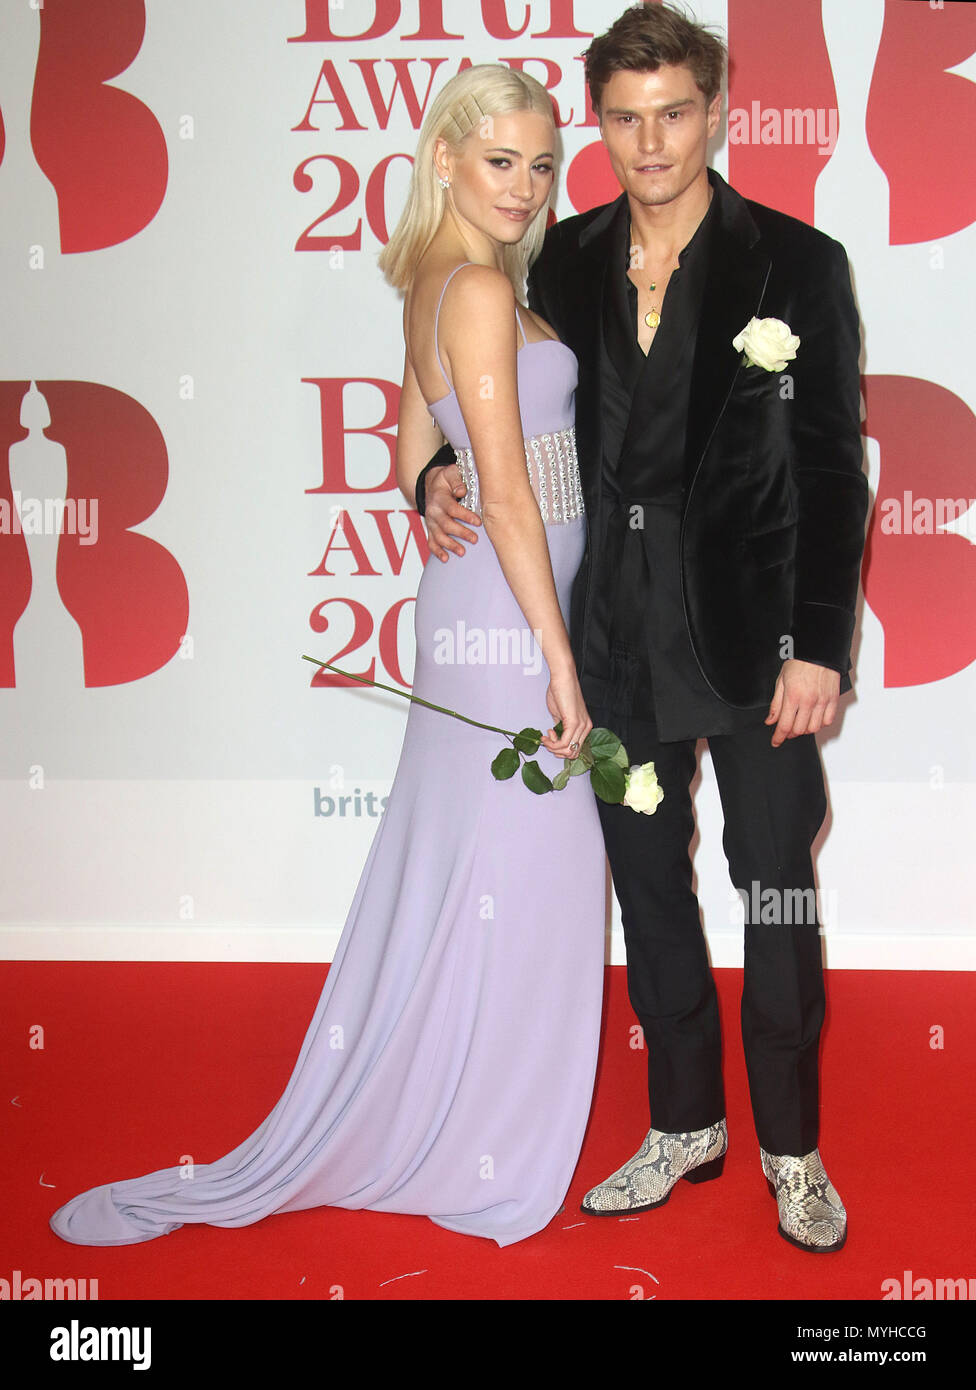 Feb 21, 2018  - Pixie Lott and Oliver Cheshire attending the BRITS Awards 2018 at O2 Arena in London, England, UK Stock Photo